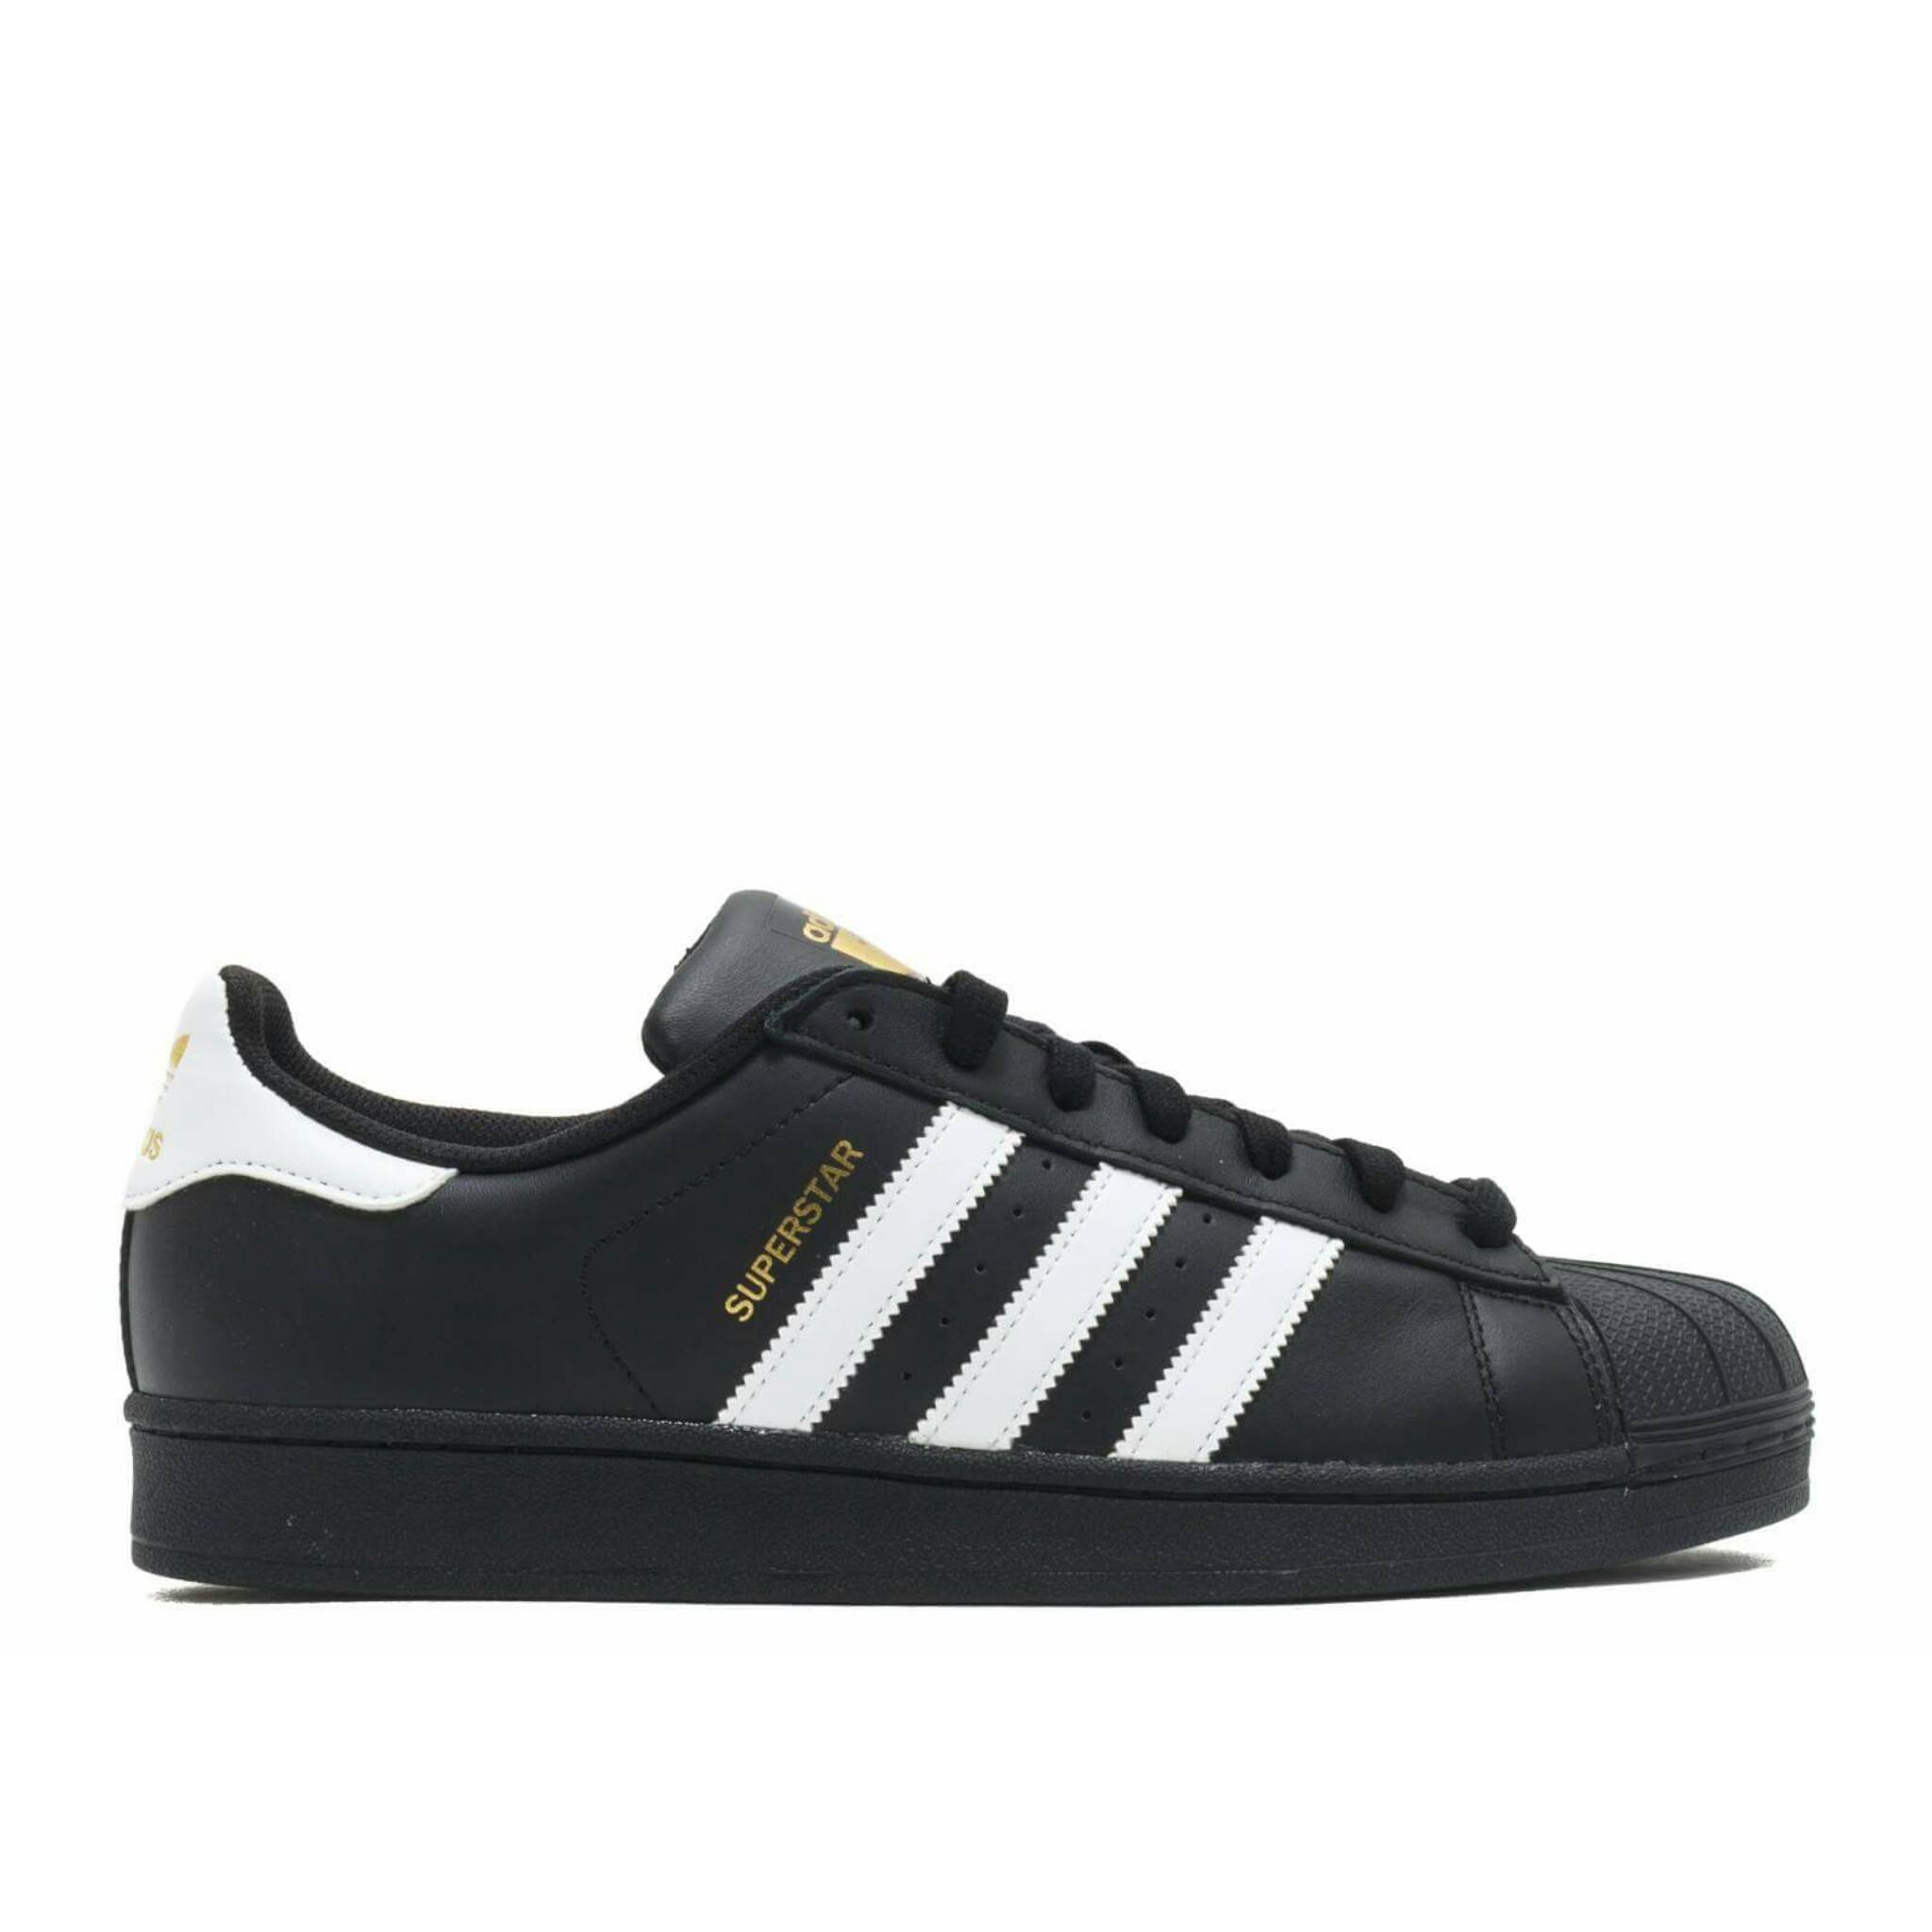 Black Adidas Superstar For Men With White Stripes - Buy Shoes Online In ...